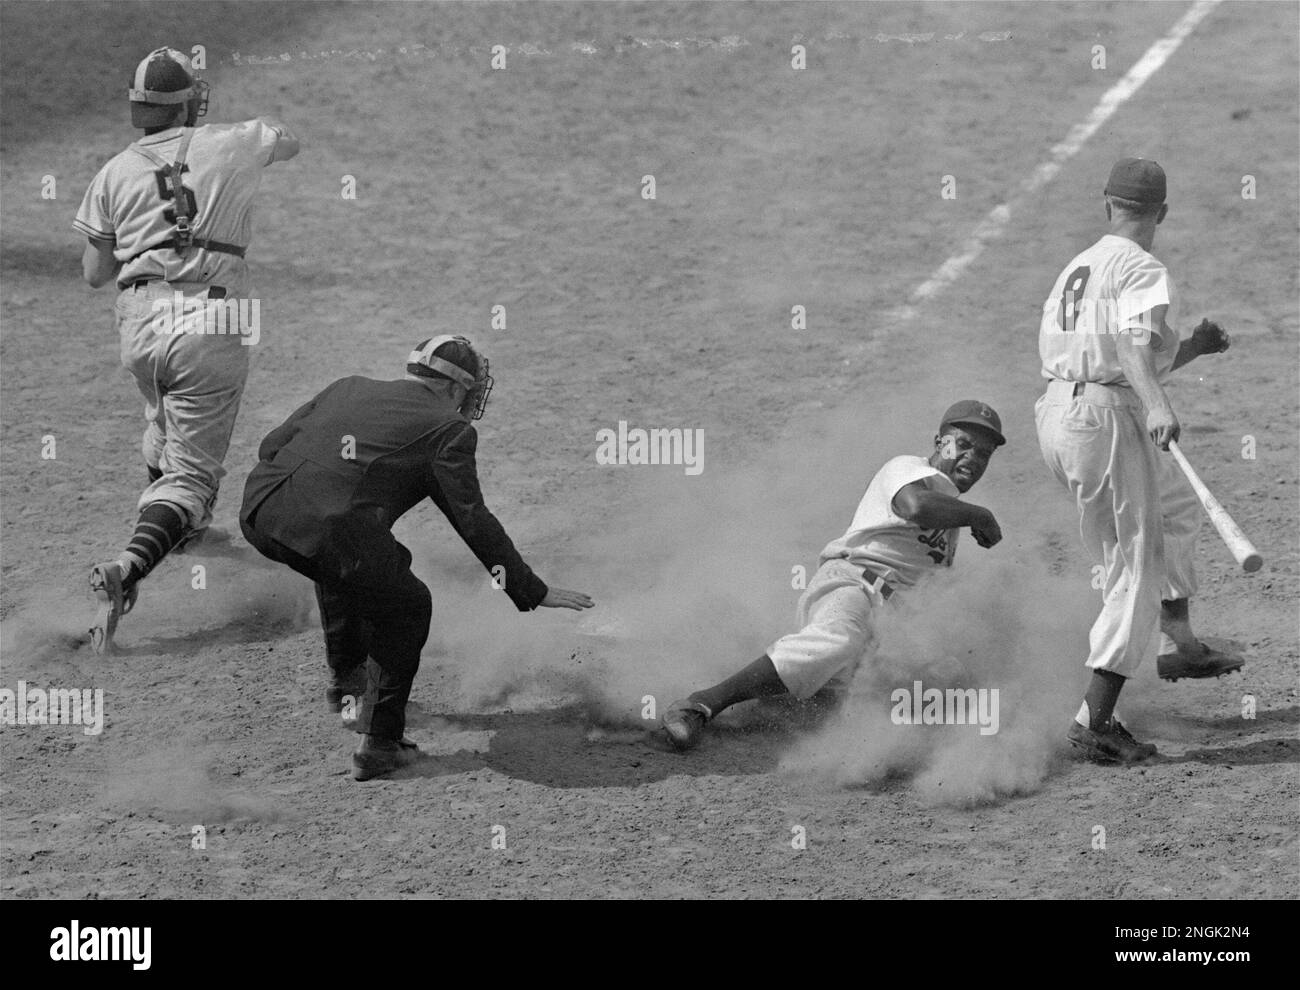 jackie robinson stealing bases